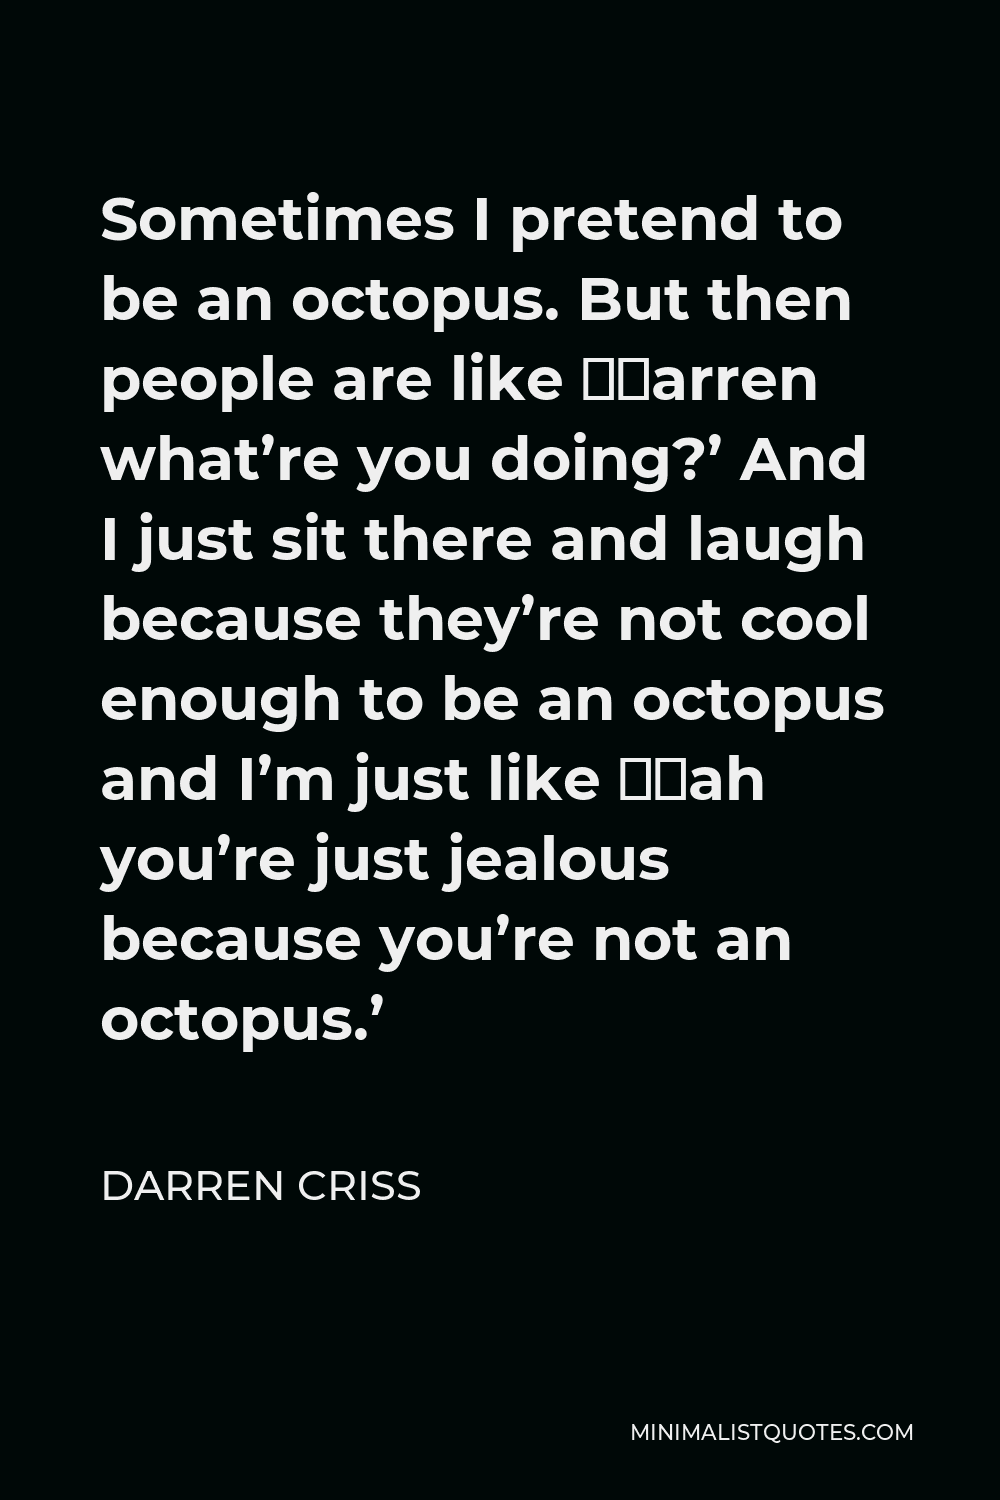 Darren Criss Quote - Sometimes I pretend to be an octopus. But then people are like ‘Darren what’re you doing?’ And I just sit there and laugh because they’re not cool enough to be an octopus and I’m just like ‘Hah you’re just jealous because you’re not an octopus.’